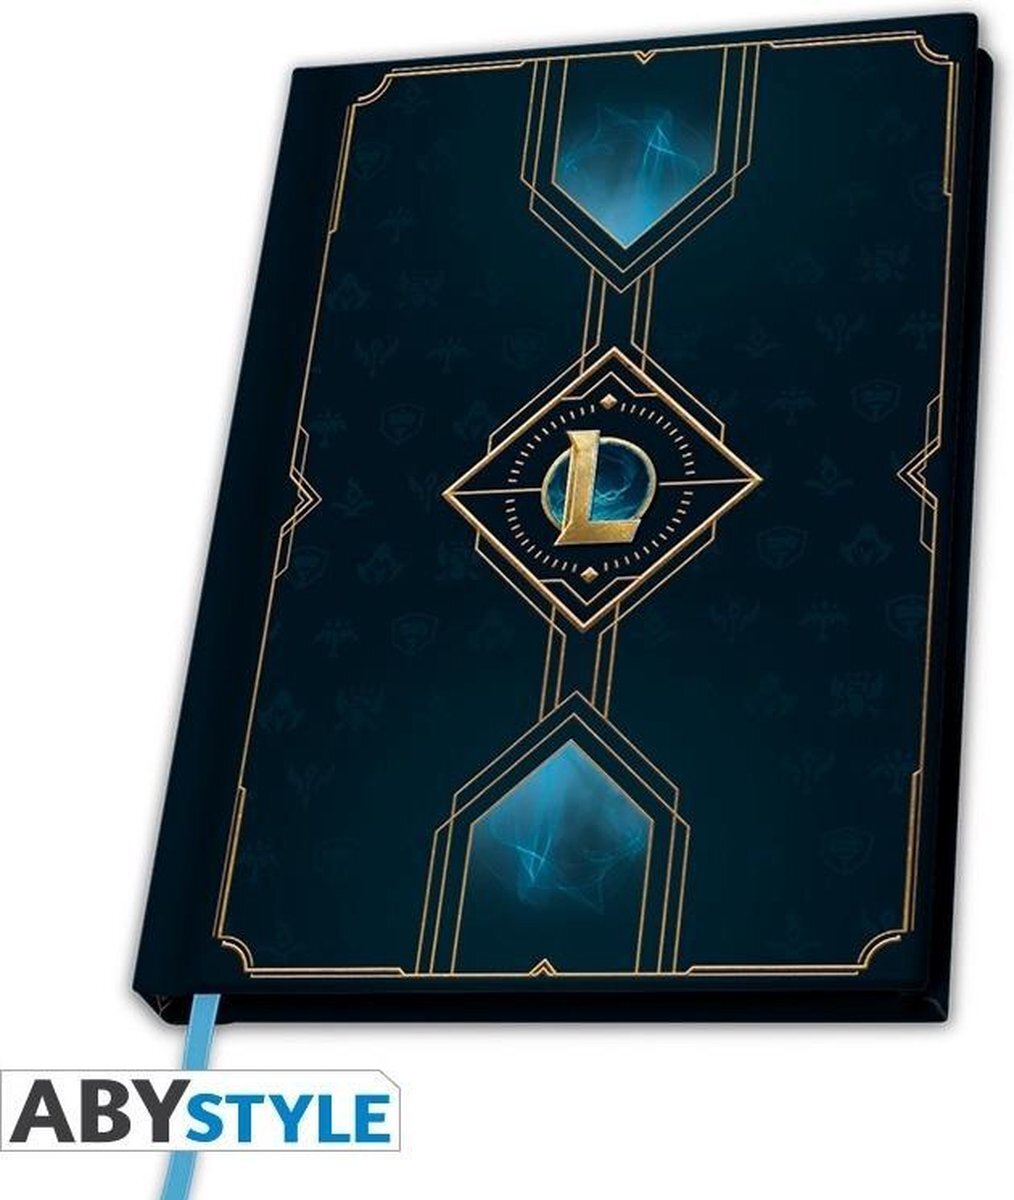 Abystyle League of Legends - A5 Notebook Merchandise